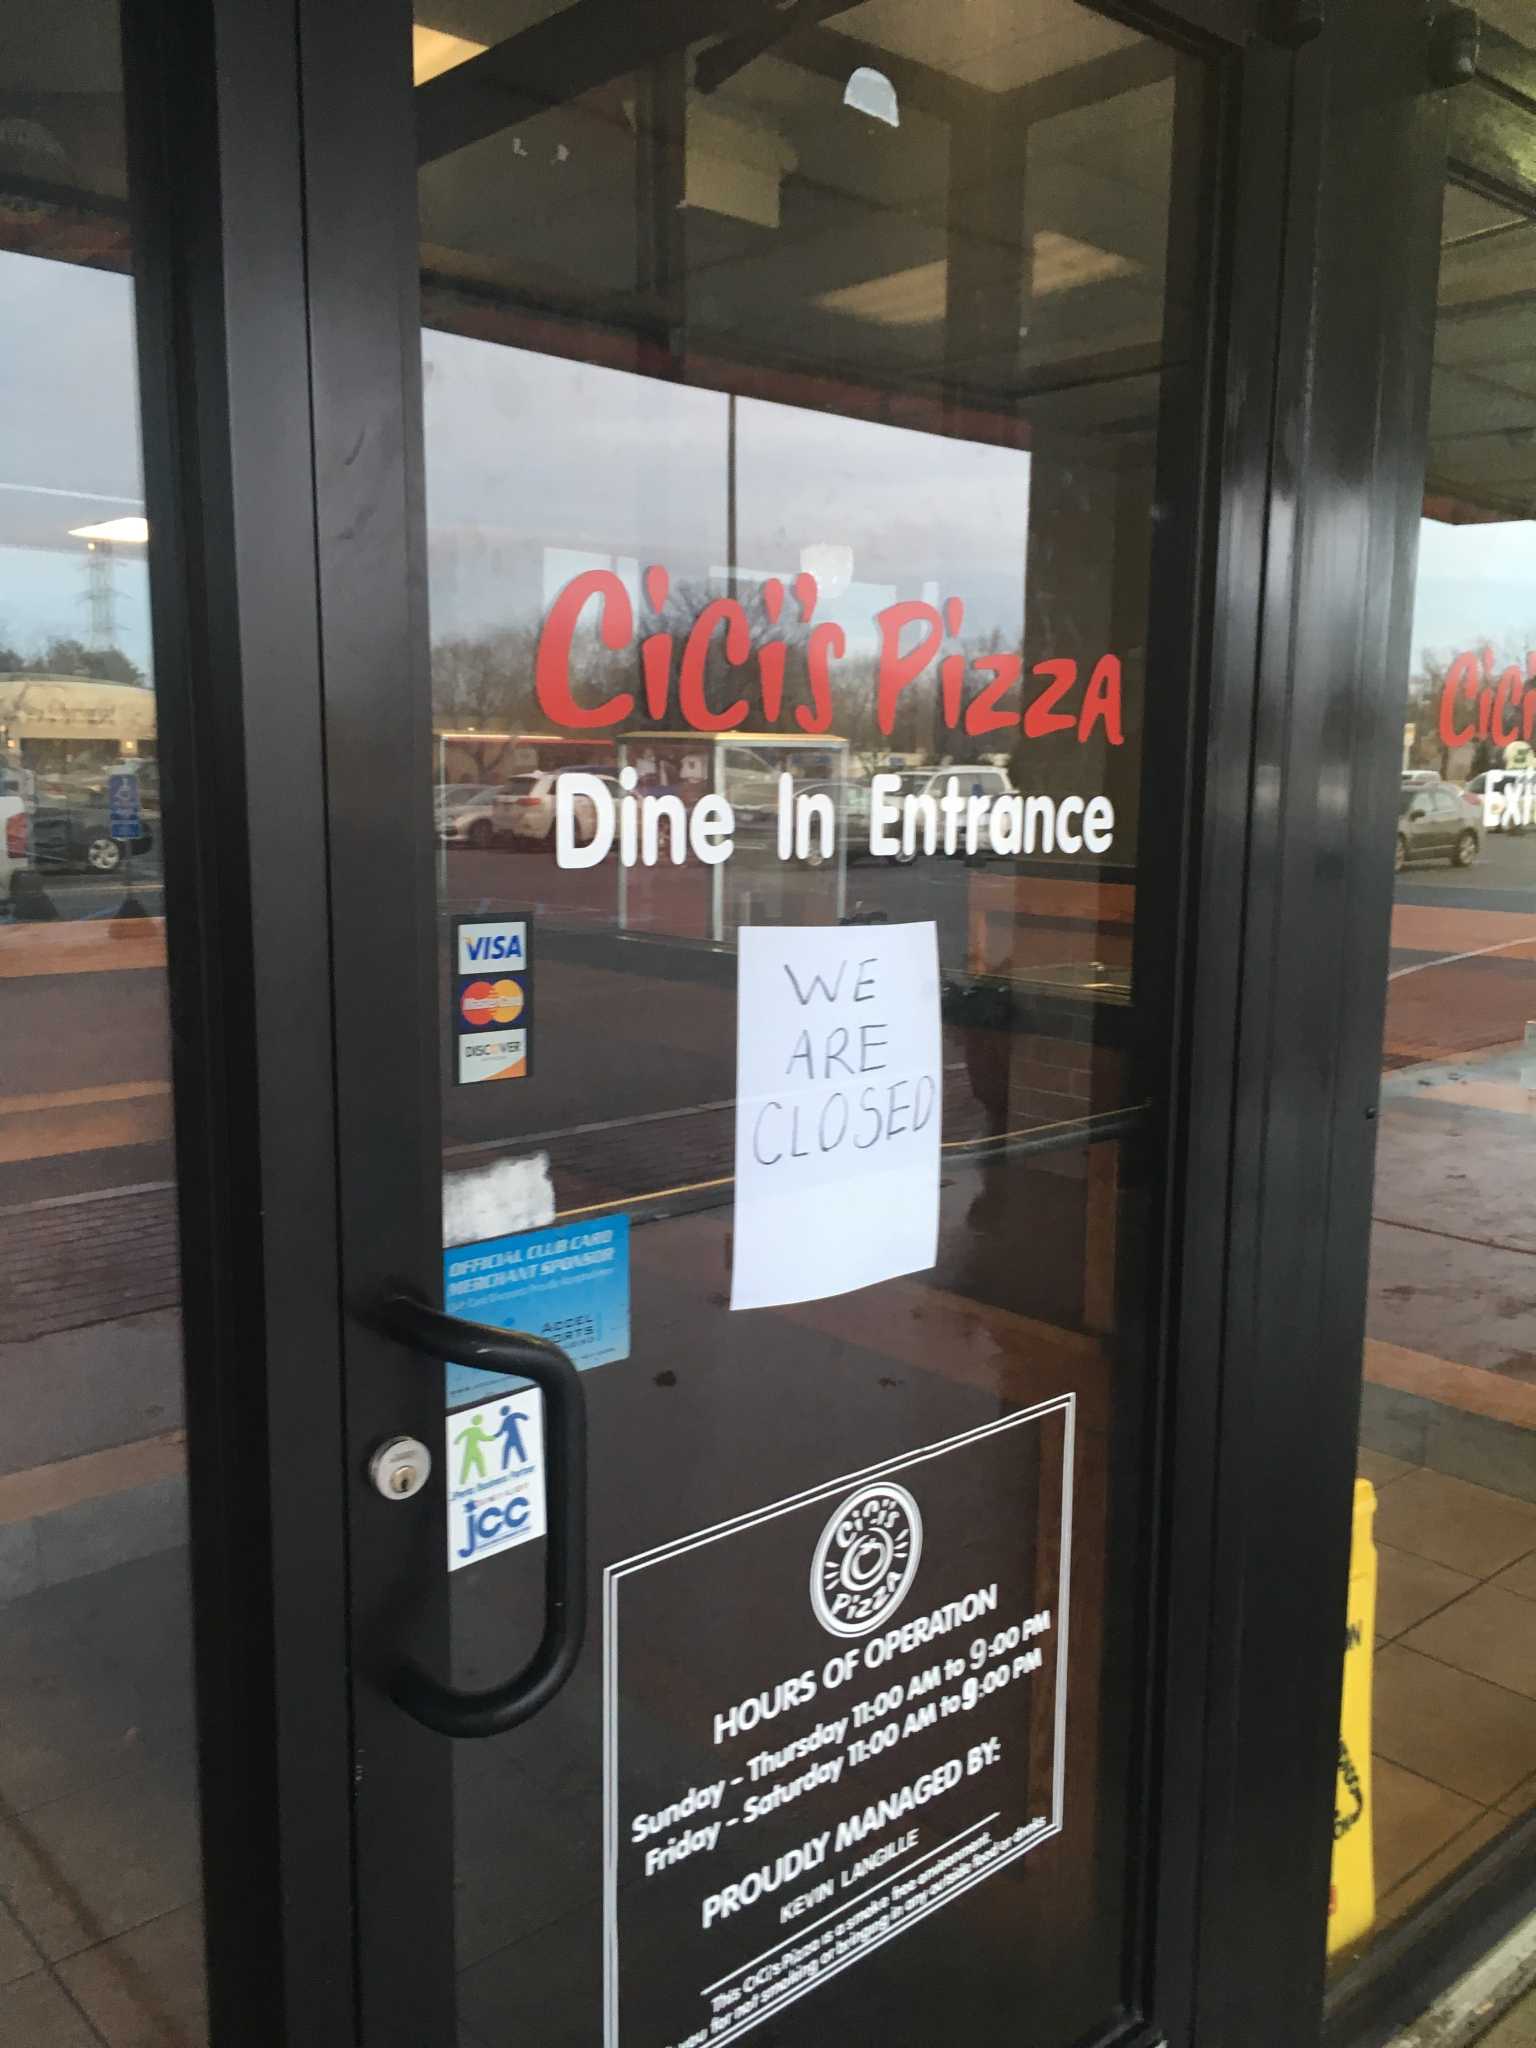 All of New York's Cicis Pizza locations now closed